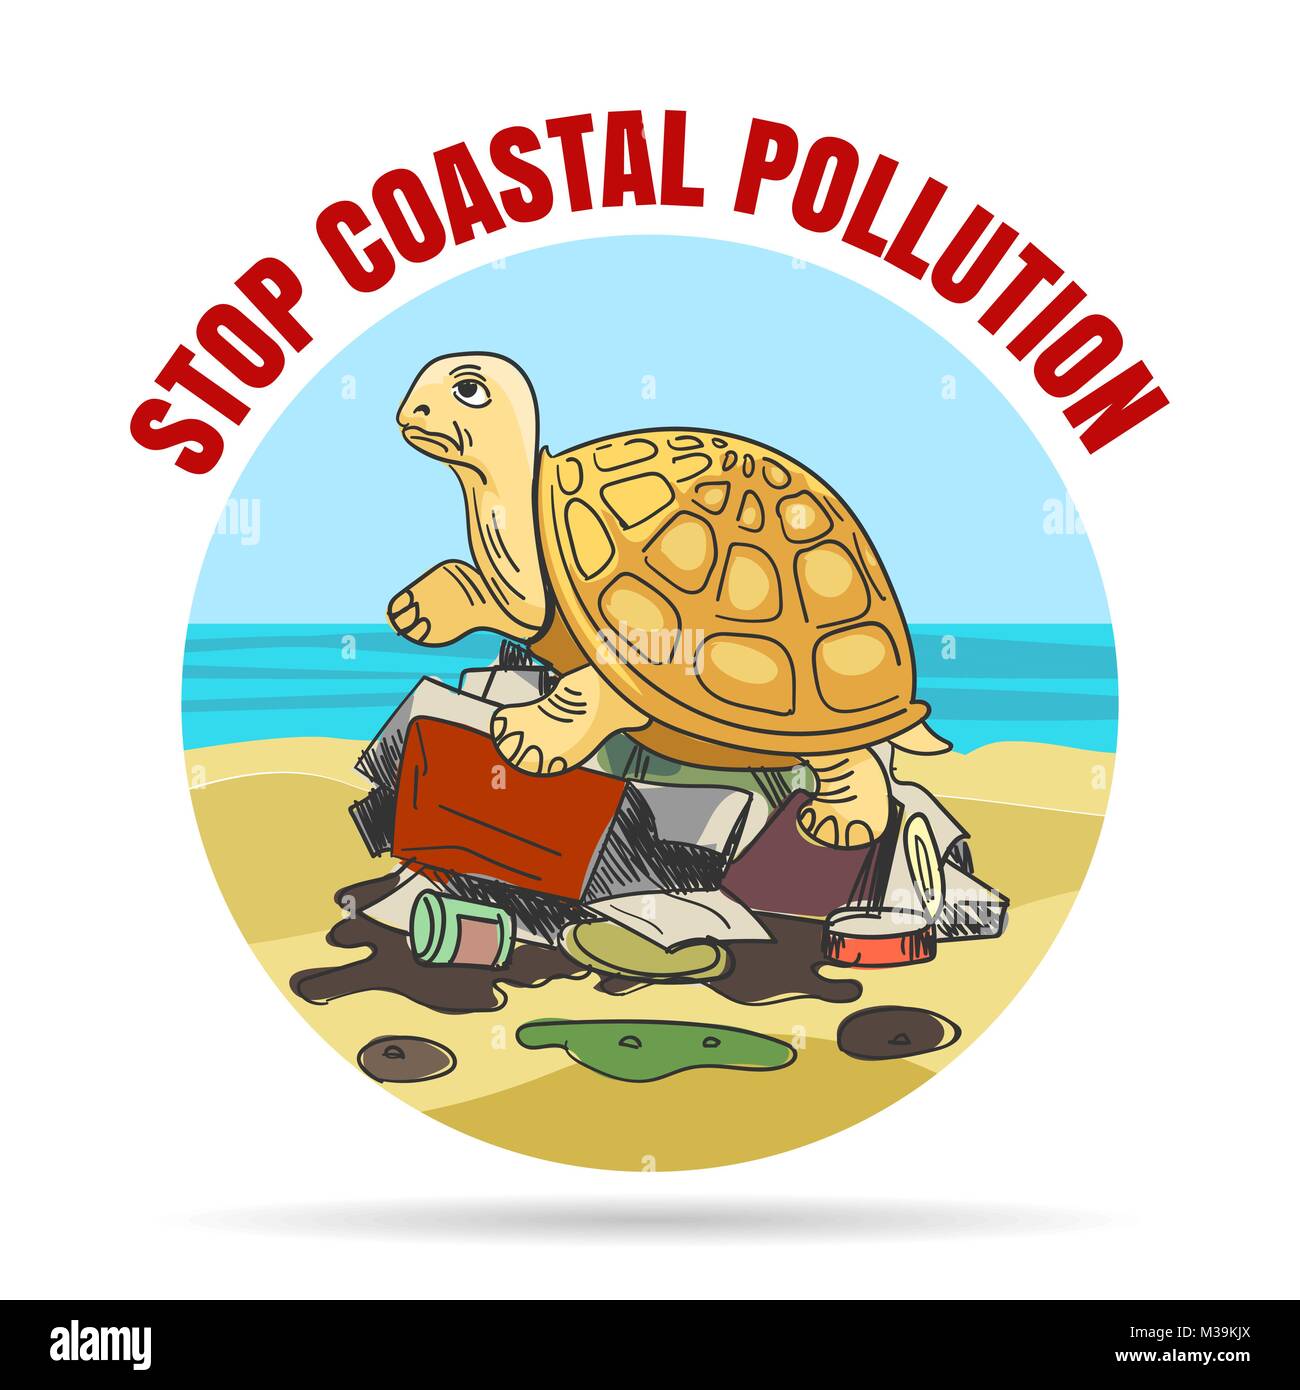 Stop coastial pollution emblem in cartoon style. Sad turtle on a pile of garbage. Vector illustration. Stock Vector